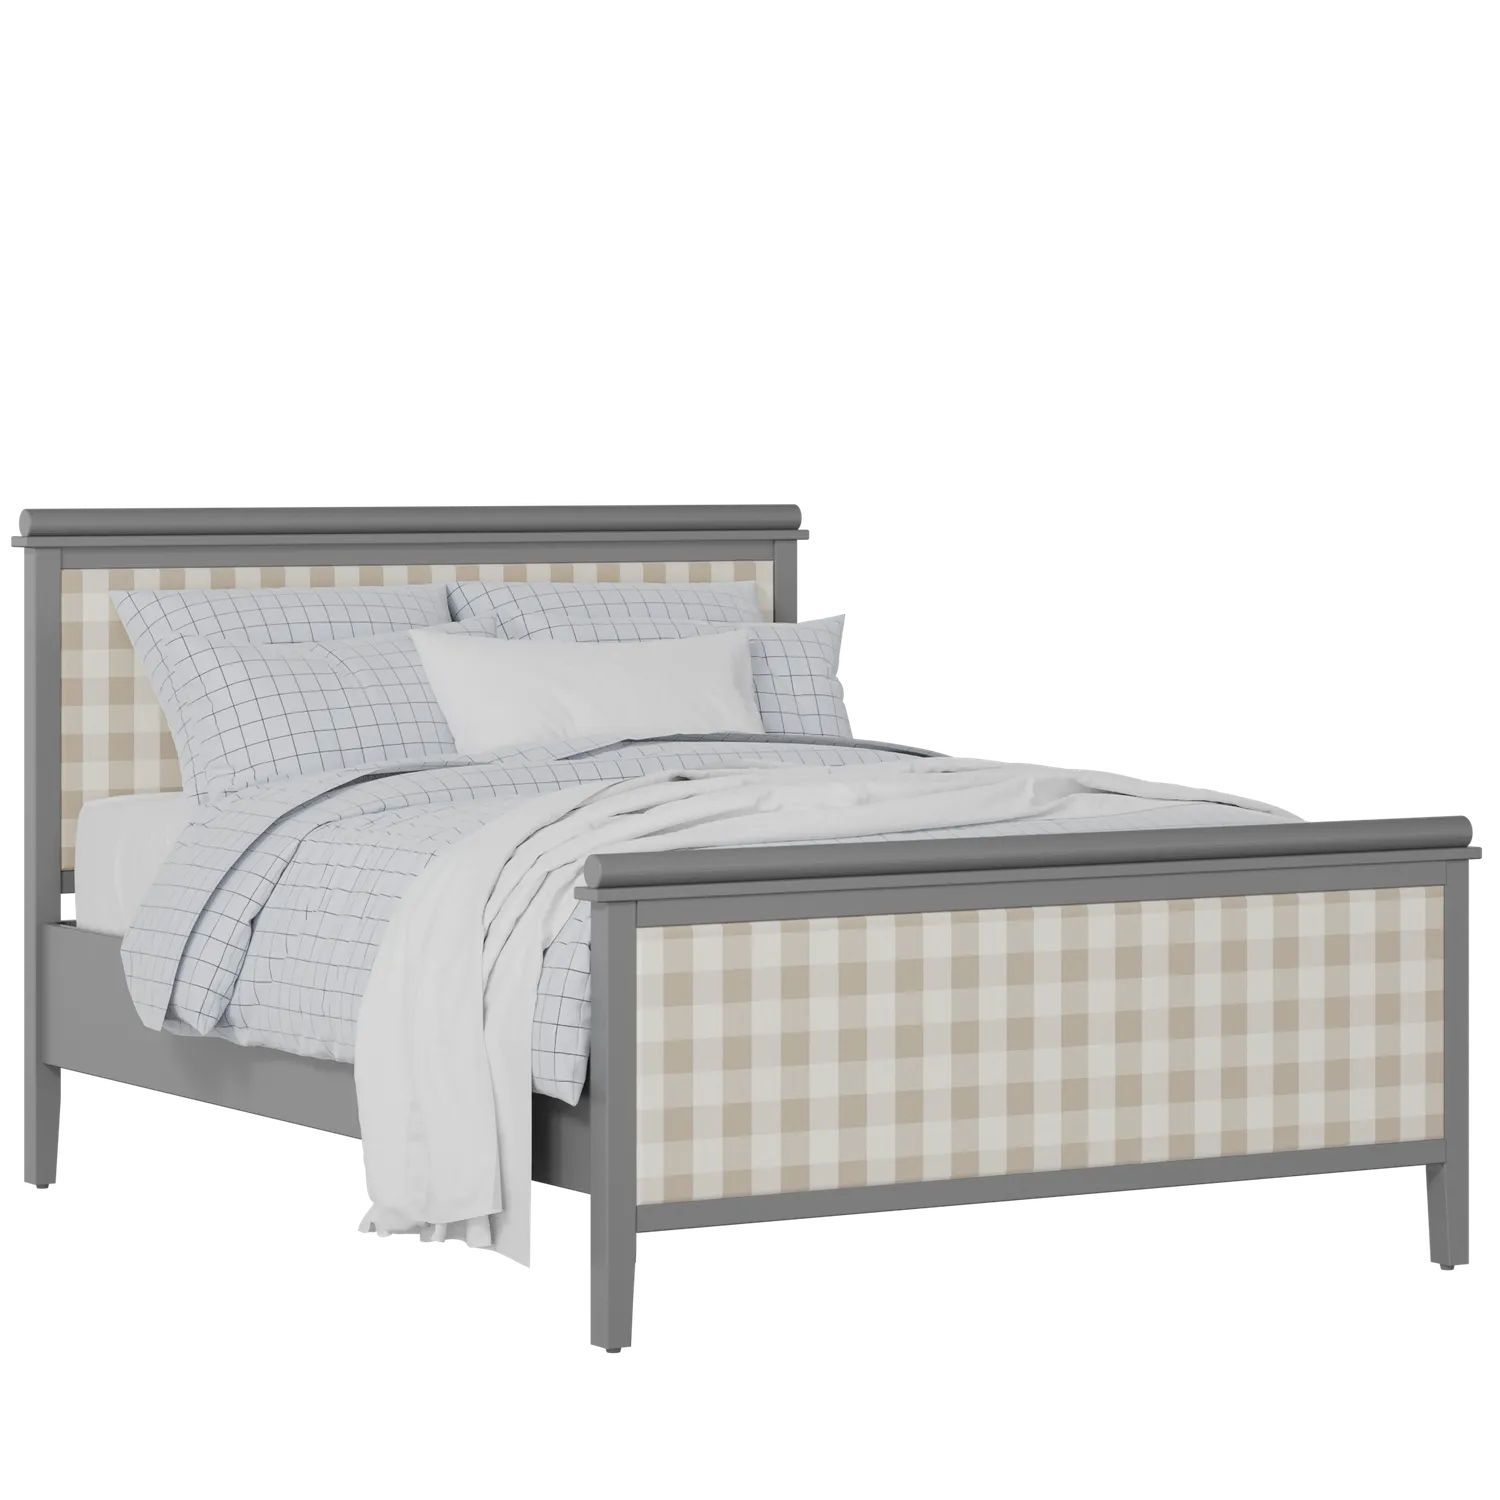 Nocturne Upholstered wood upholstered bed in grey with Romo Kemble Putty fabric